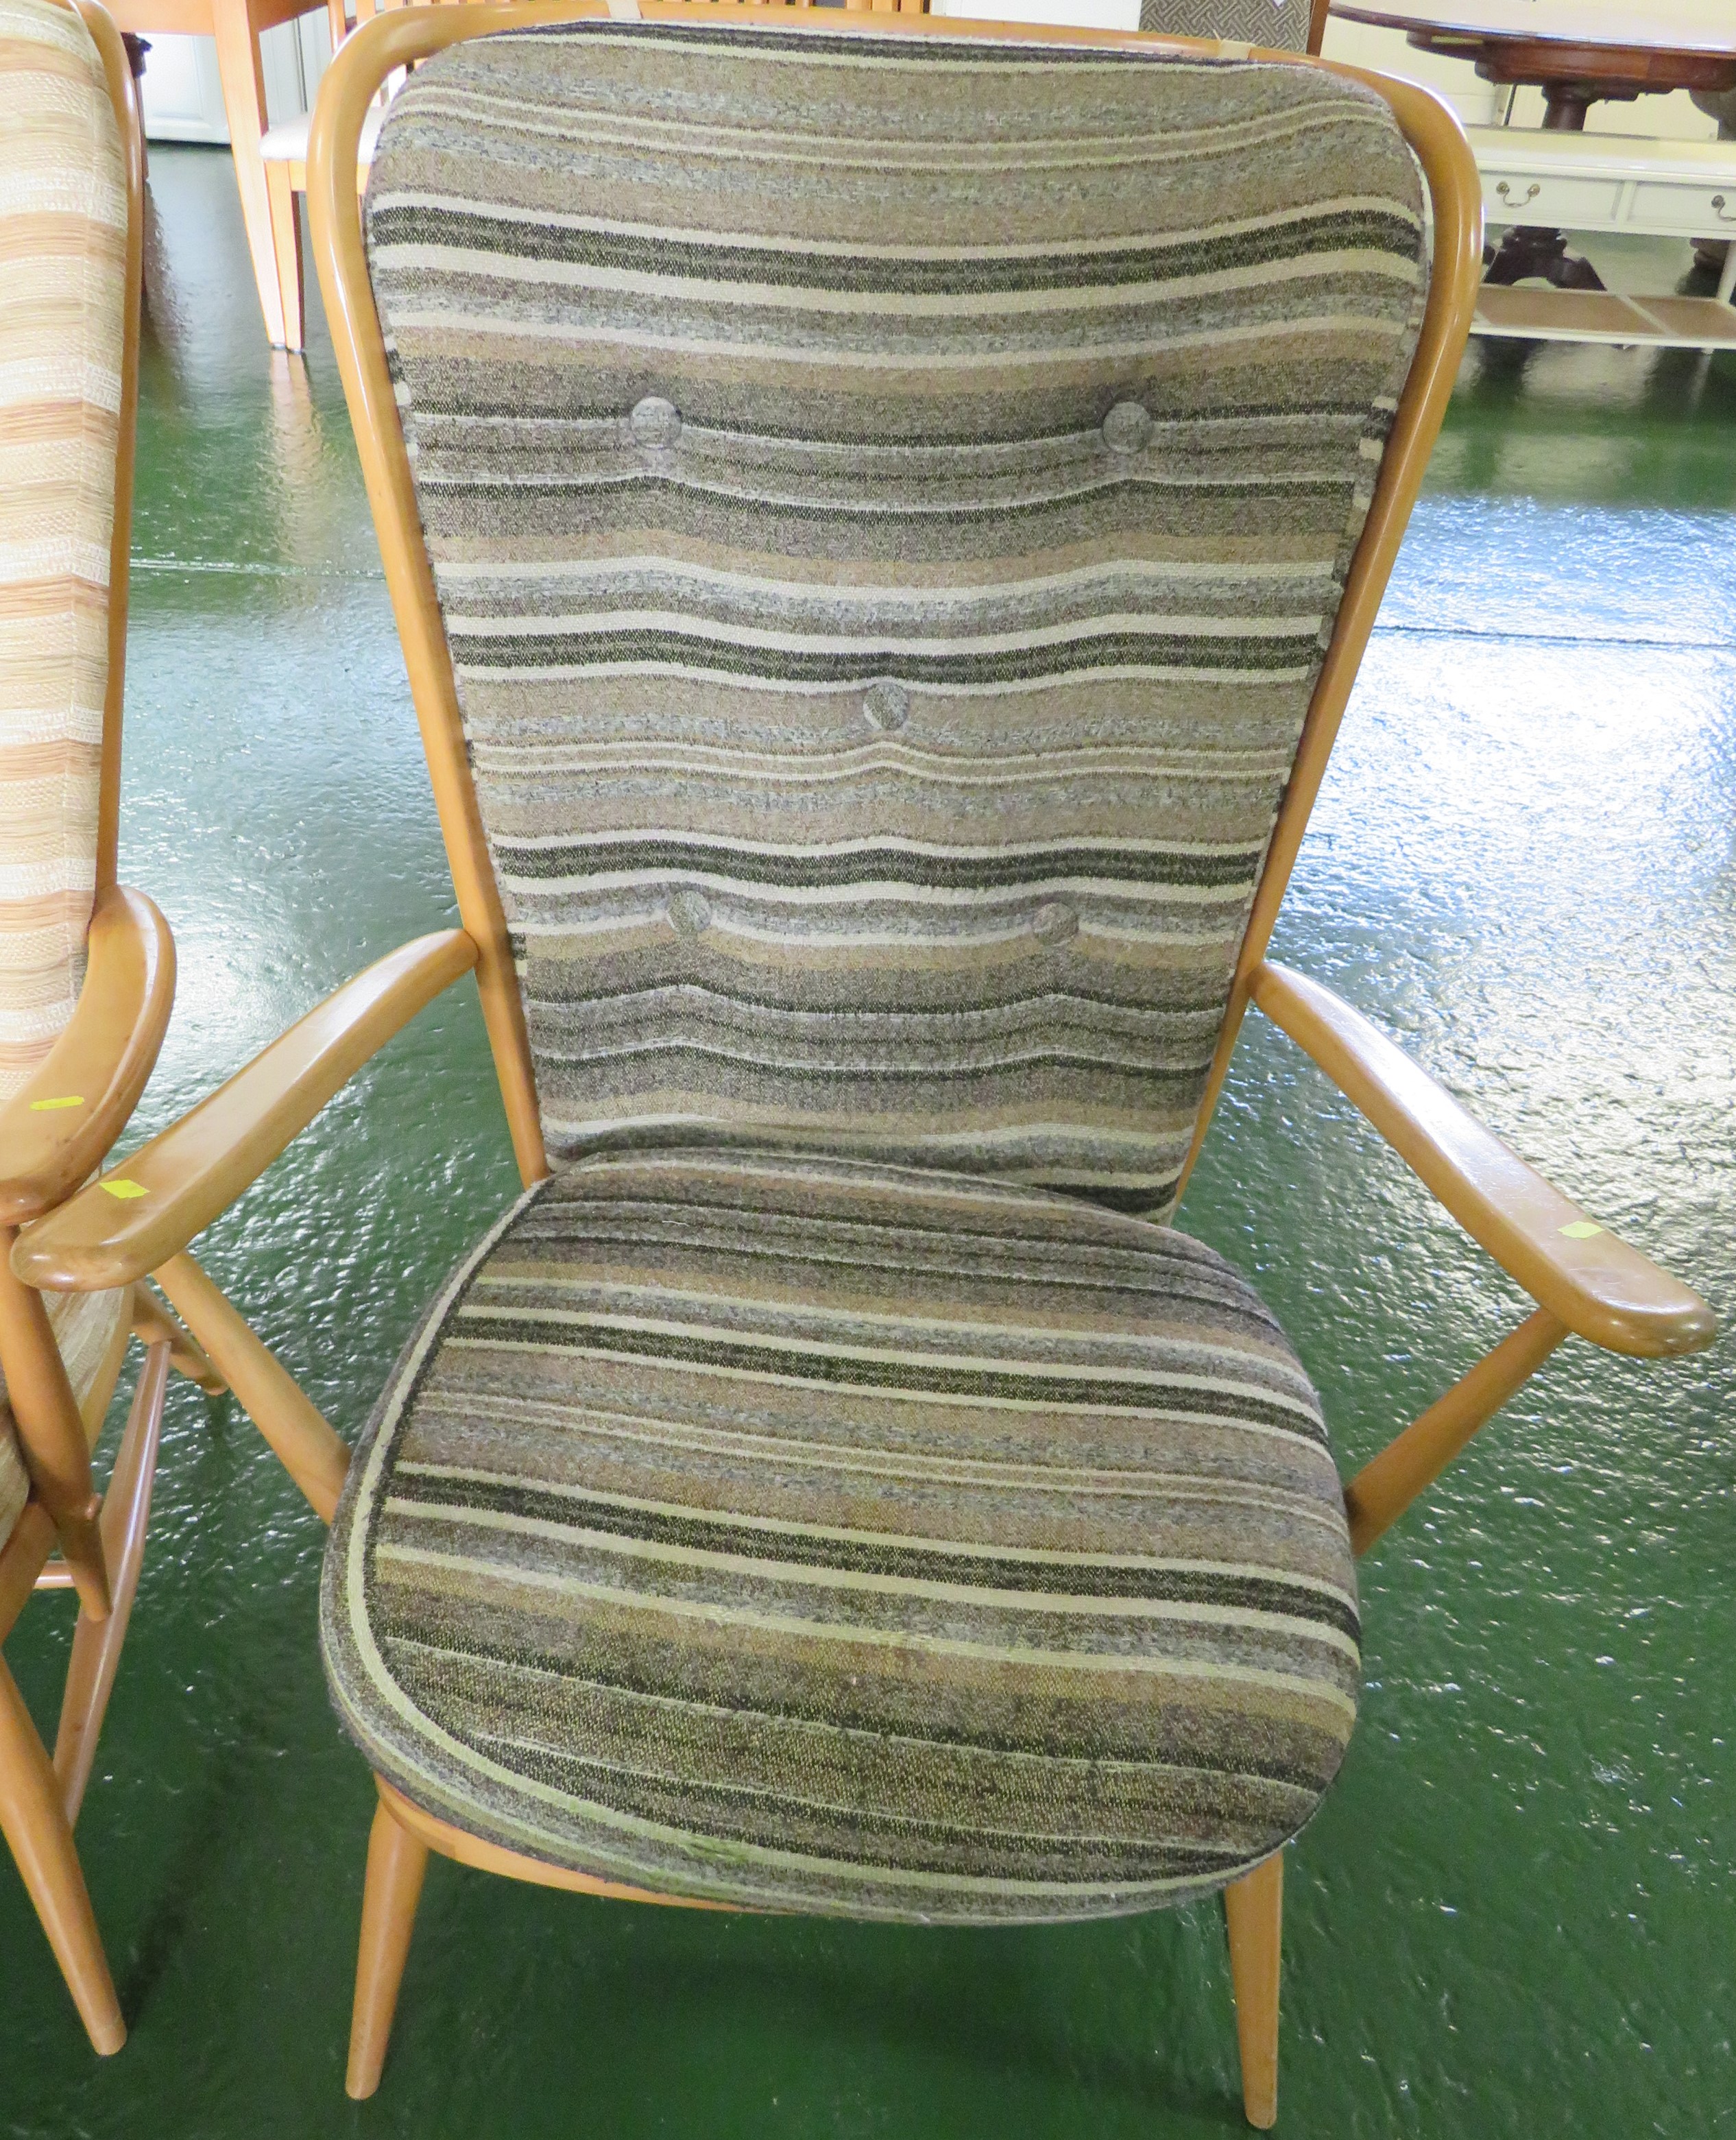 MATCHED PAIR OF ERCOL LIGHT ELM ARMCHAIRS WITH TIE ON STRIPED UPHOLSTERED CUSHIONS - Image 3 of 3